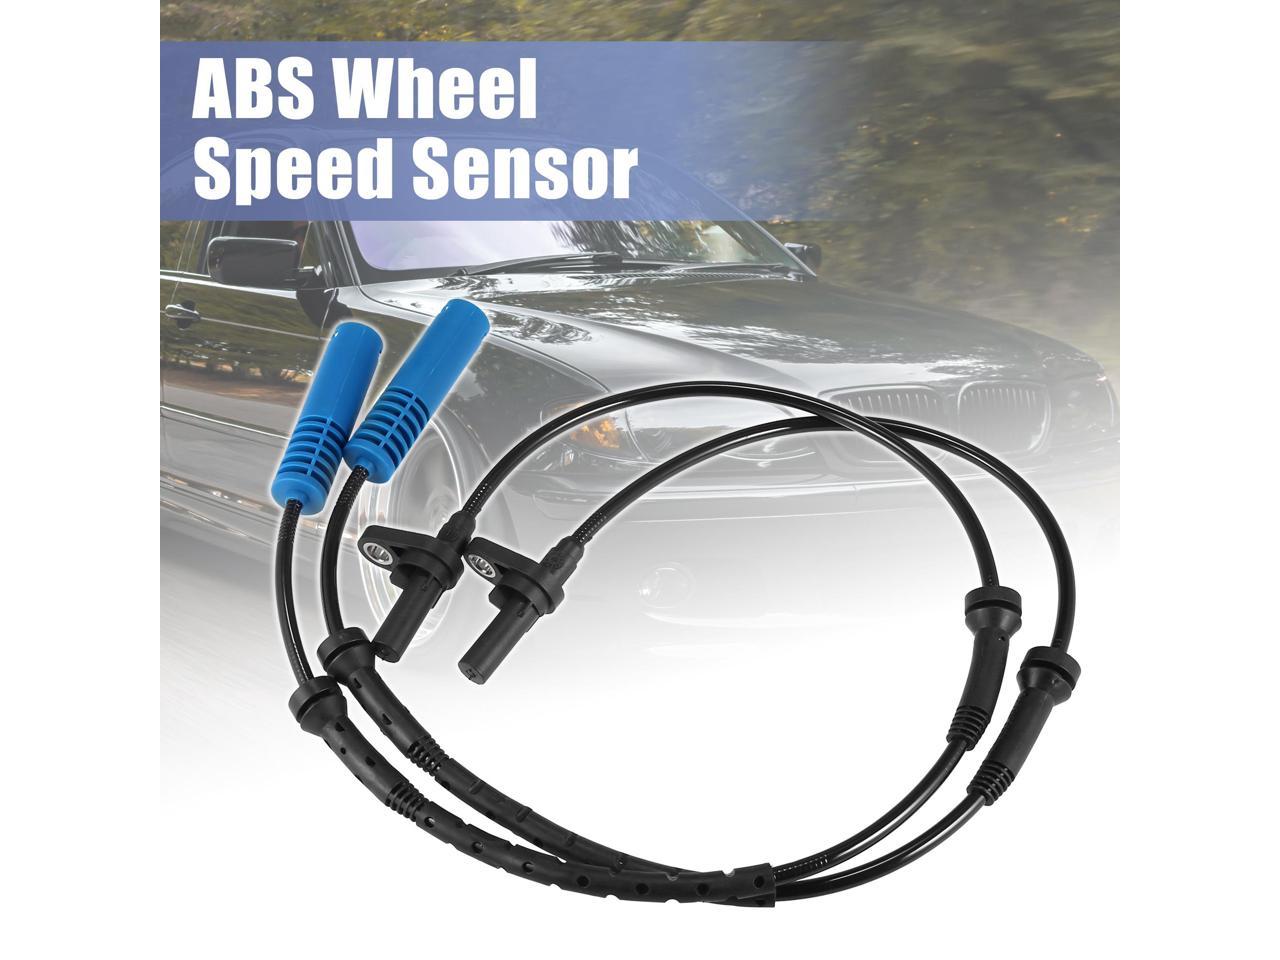 Replaces 5S10521 34526764858 0265007669 ALS1830 HiSport 2PCS ABS Wheel Speed Sensor Front Left & Right Location 